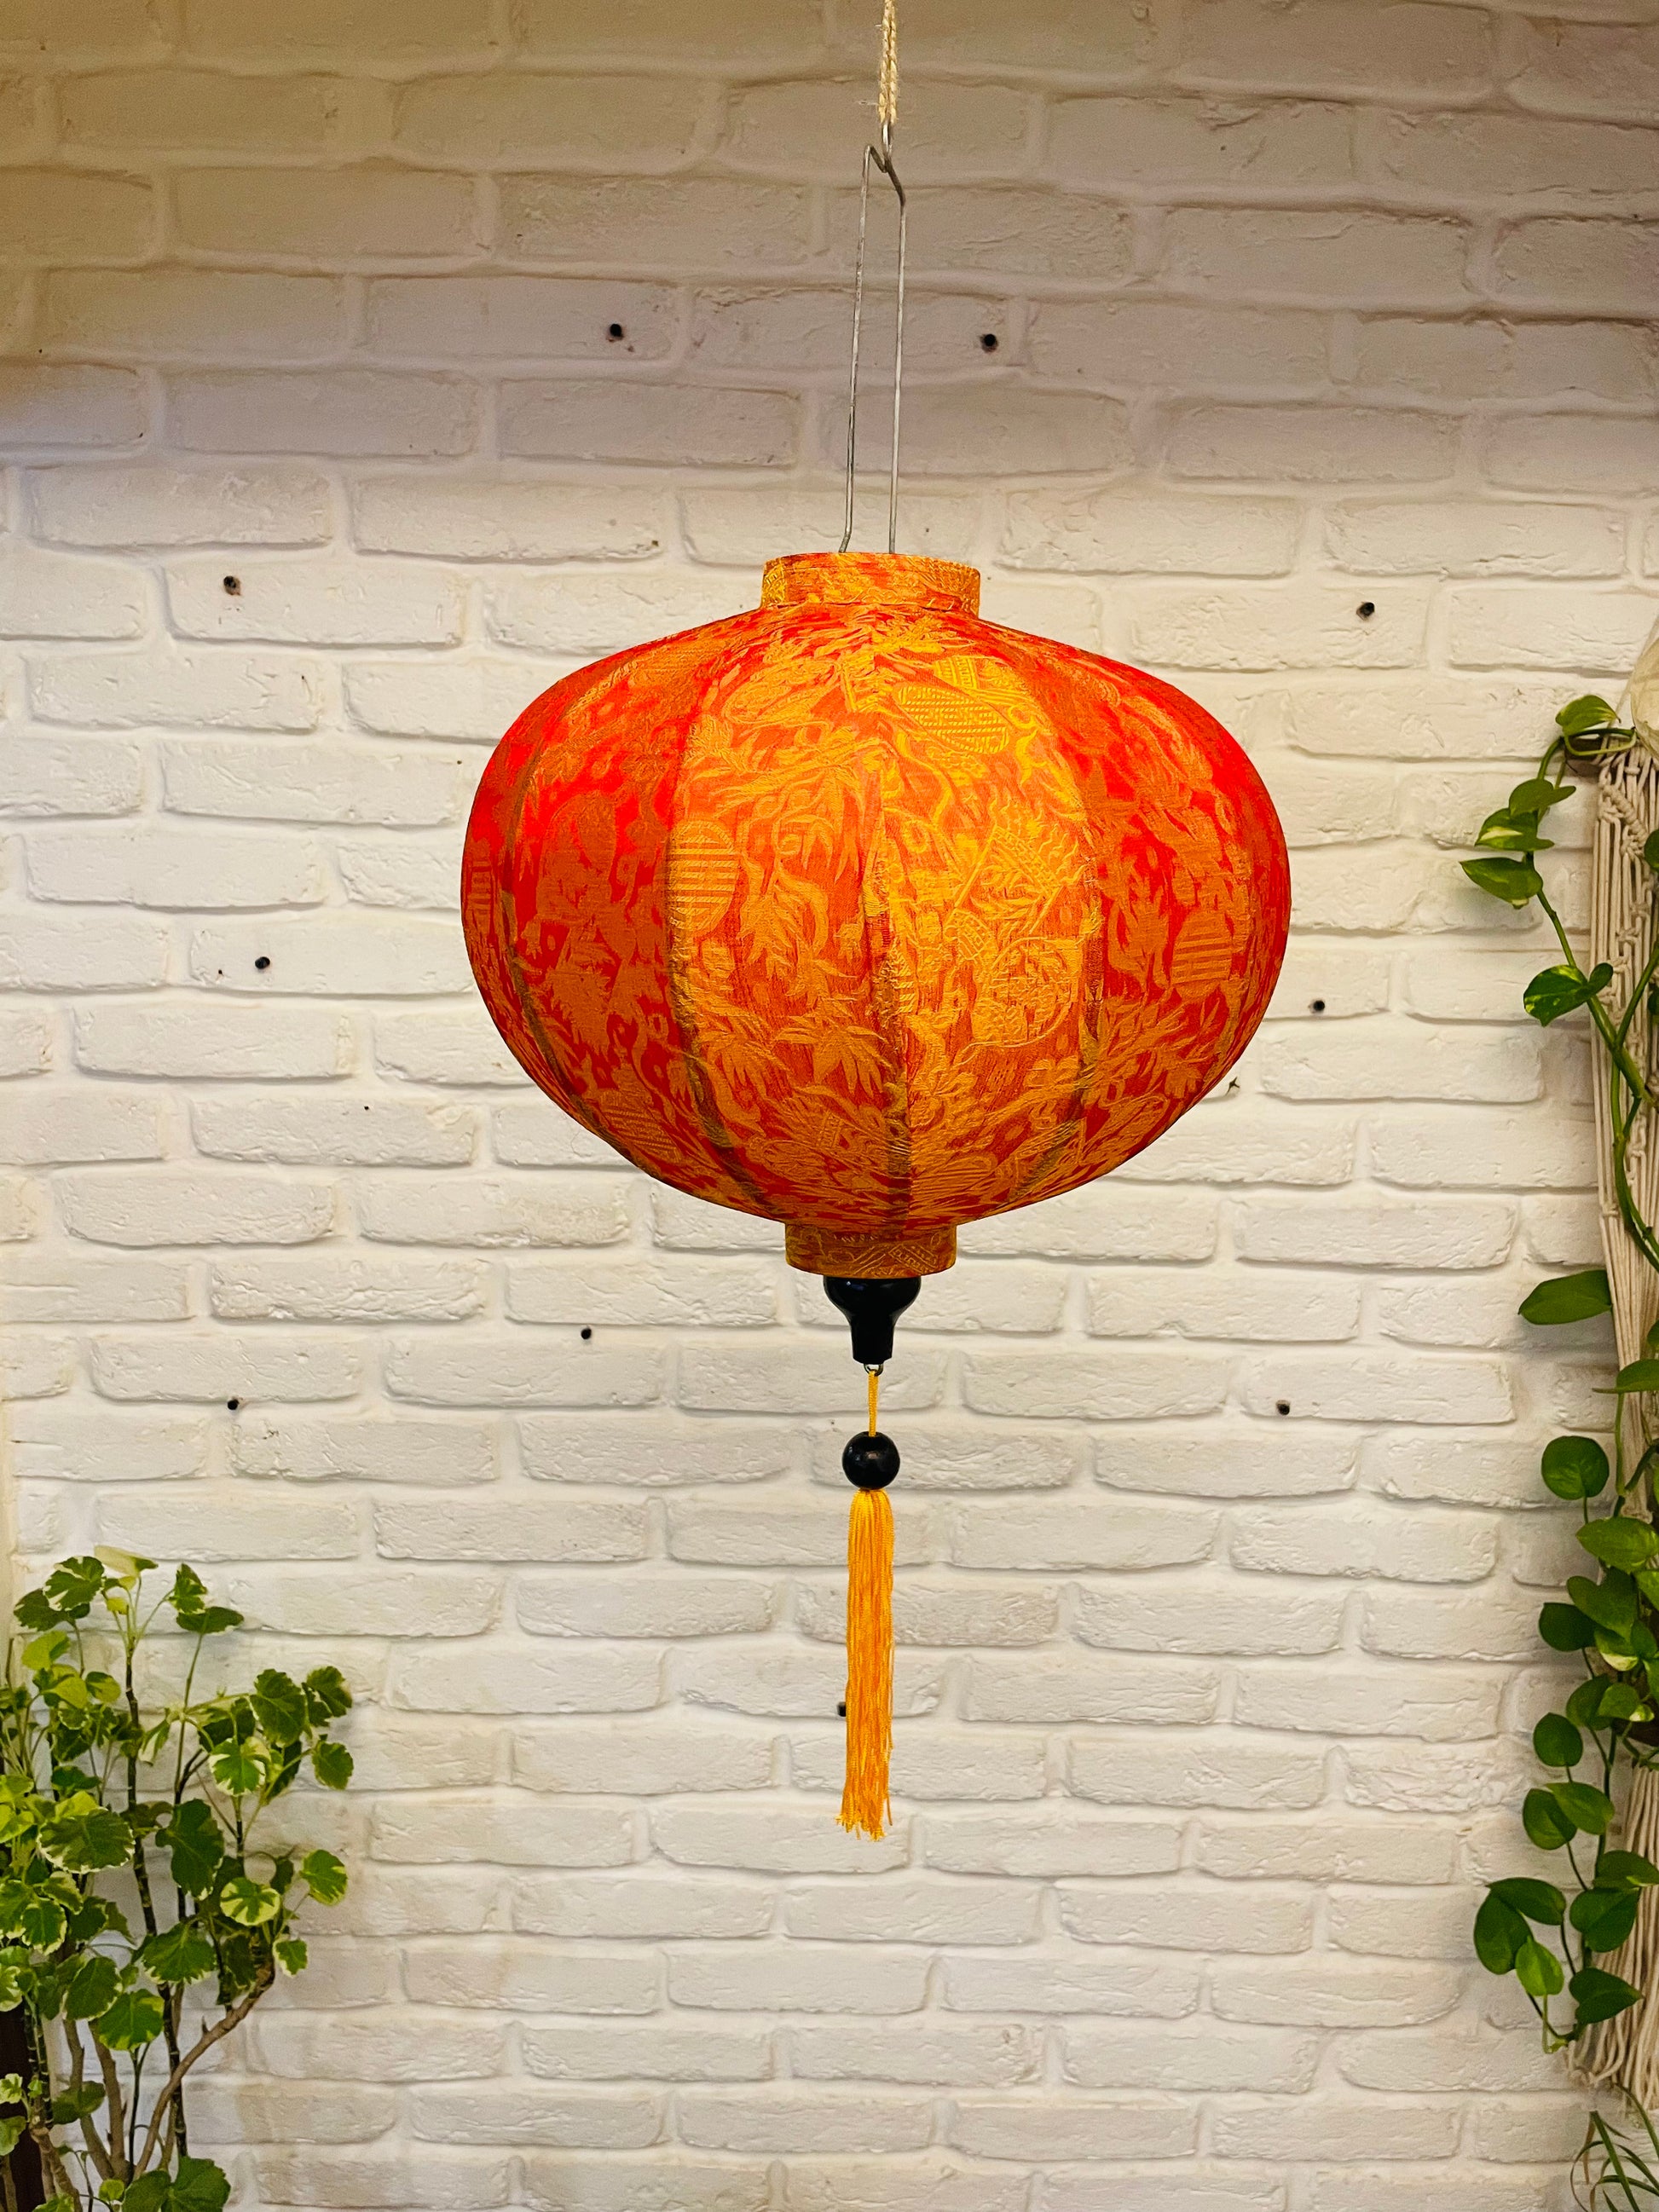 Buy Best Lampshade for your Dream Home & Garden   Asian-inspired décor, Authentic Vietnamese artwork,  Celebration dinner décor, Culture-infused textures, Folding technique lanterns, Hand-painted lanterns, Home decor lanterns, Premium silk lanterns, Restaurant décor, Silk lantern décor, Spaceship shaped lanterns, Unfolding instructions included, Vietnamese silk lanterns, Wedding lanterns, TESU